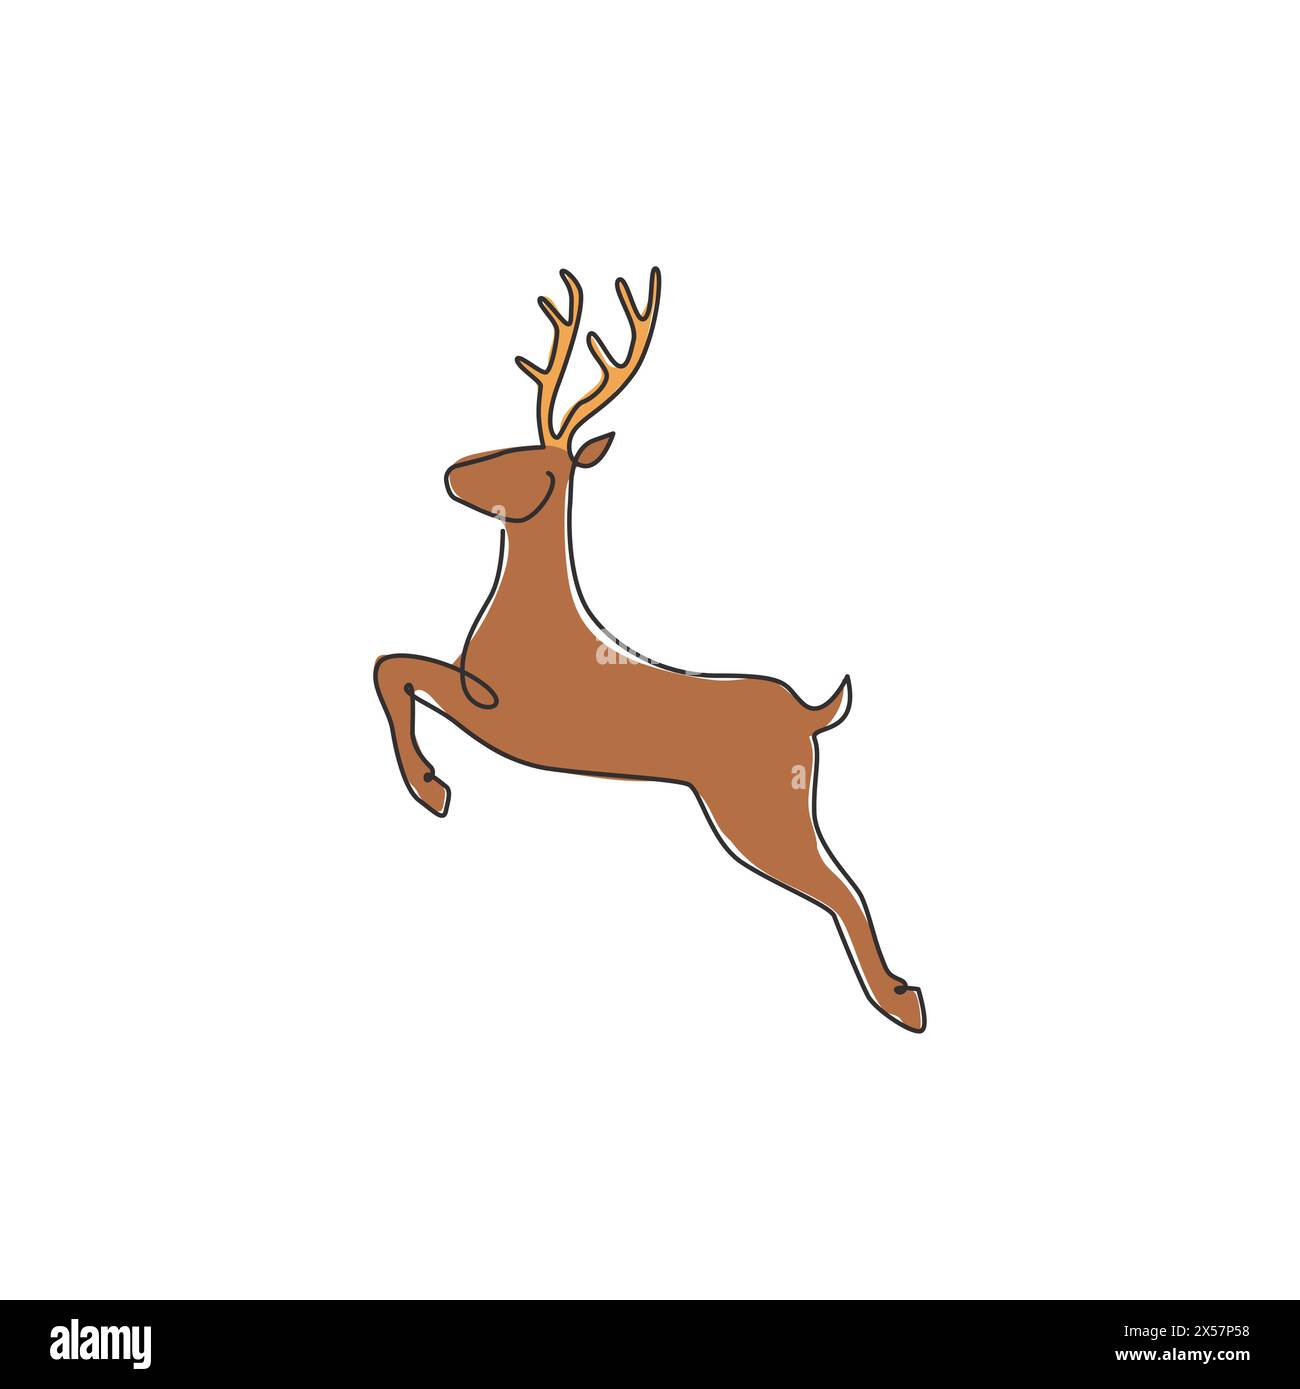 One continuous line drawing of jumping wild reindeer for national park logo identity. Elegant buck mammal animal mascot concept for nature conservatio Stock Vector